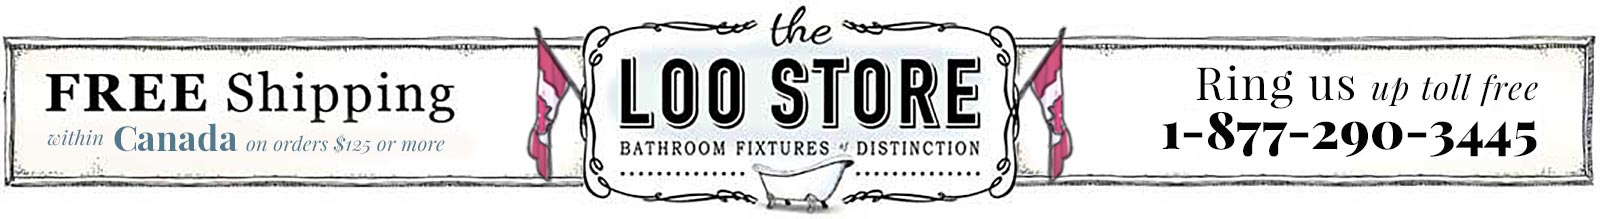 Clawfoot Tubs and Faucets - The Loo Store